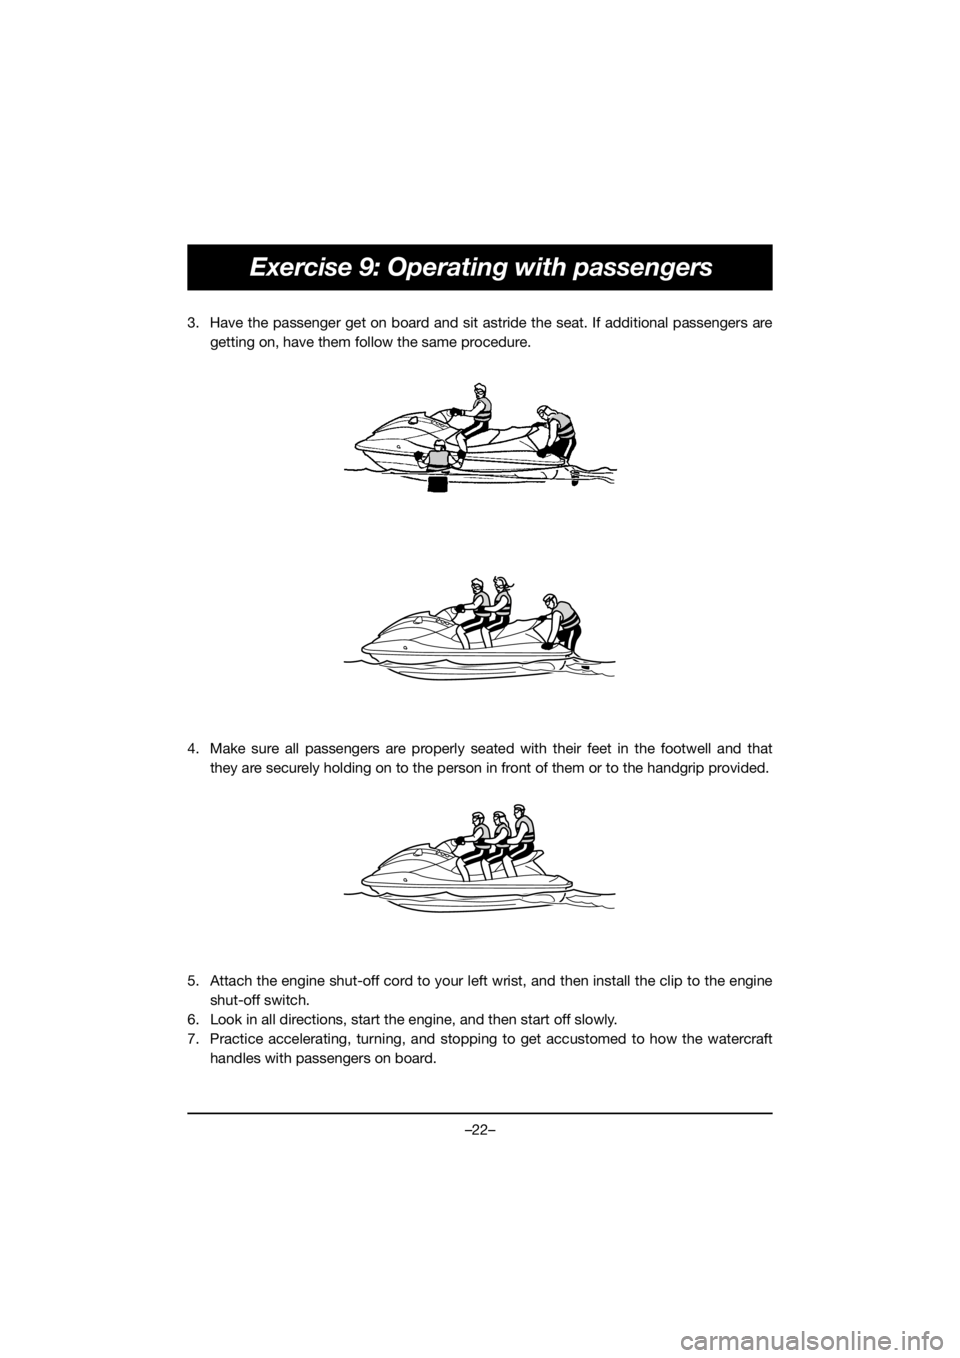 YAMAHA EX 2020  Manual de utilização (in Portuguese) –22–
Exercise 9: Operating with passengers
3. Have the passenger get on board and sit astride the seat. If additional passengers are
getting on, have them follow the same procedure. 
4. Make sure 